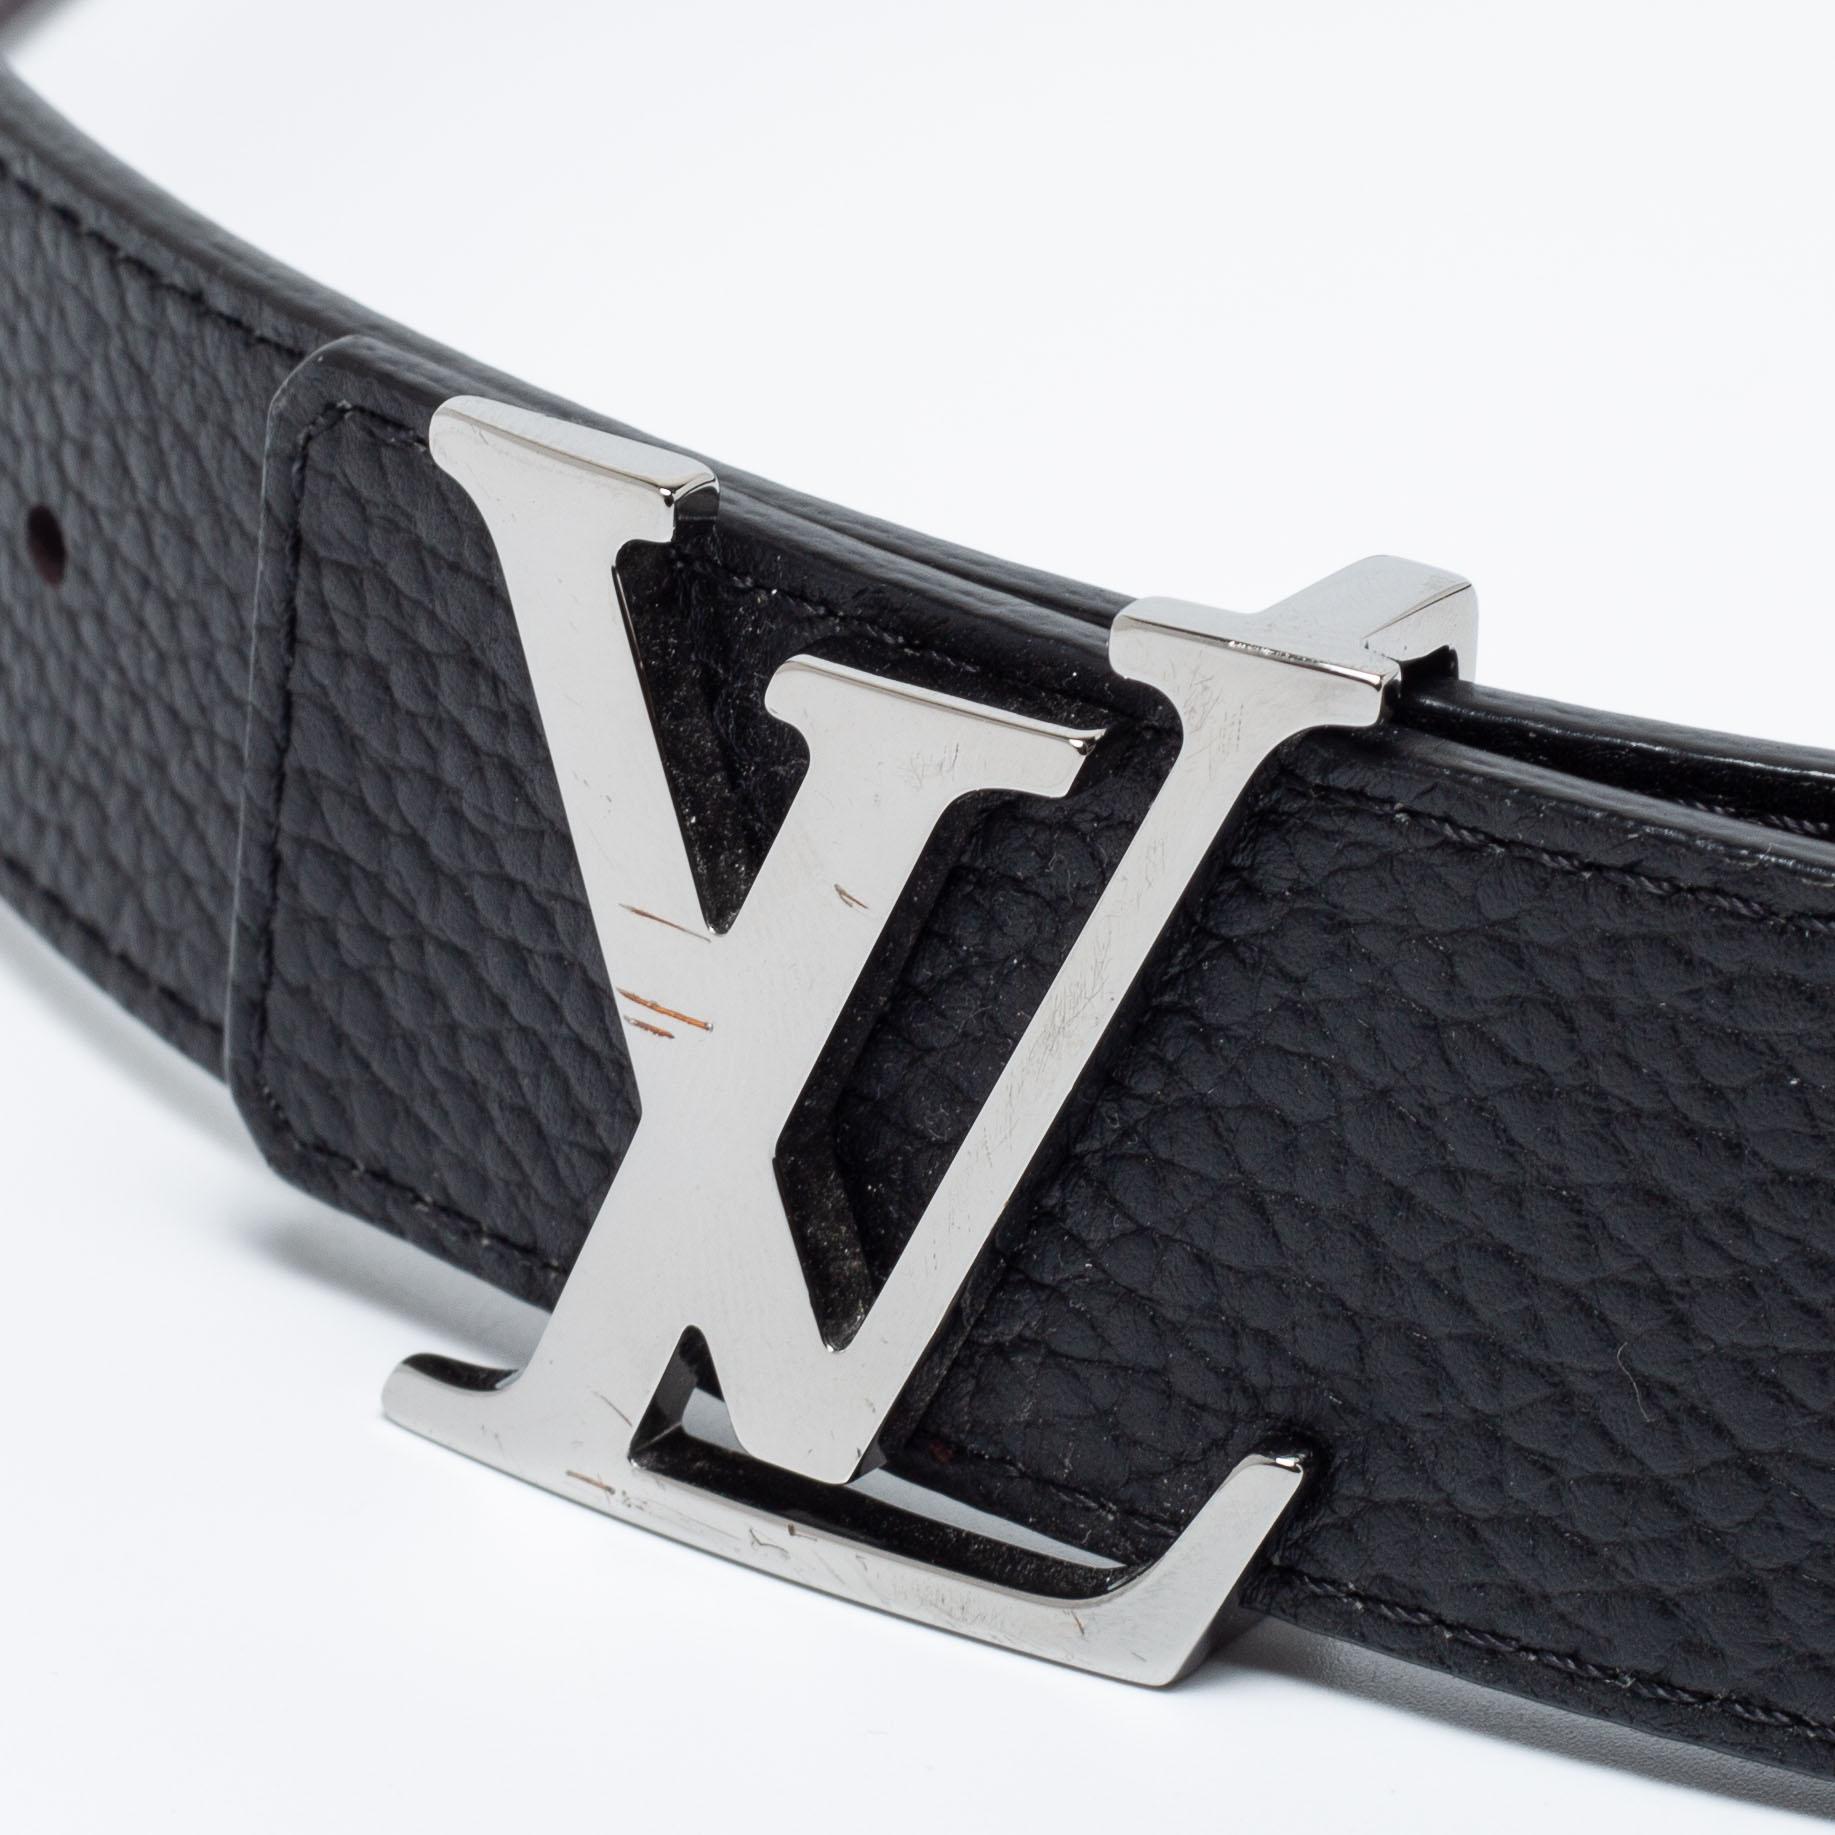 This Initiales belt from Louis Vuitton is simple in design but nevertheless quite appealing. The Taurillion leather belt flaunts a smooth construction with neat stitches and has a gunmetal-tone buckle in the form of an enlarged LV symbol. The